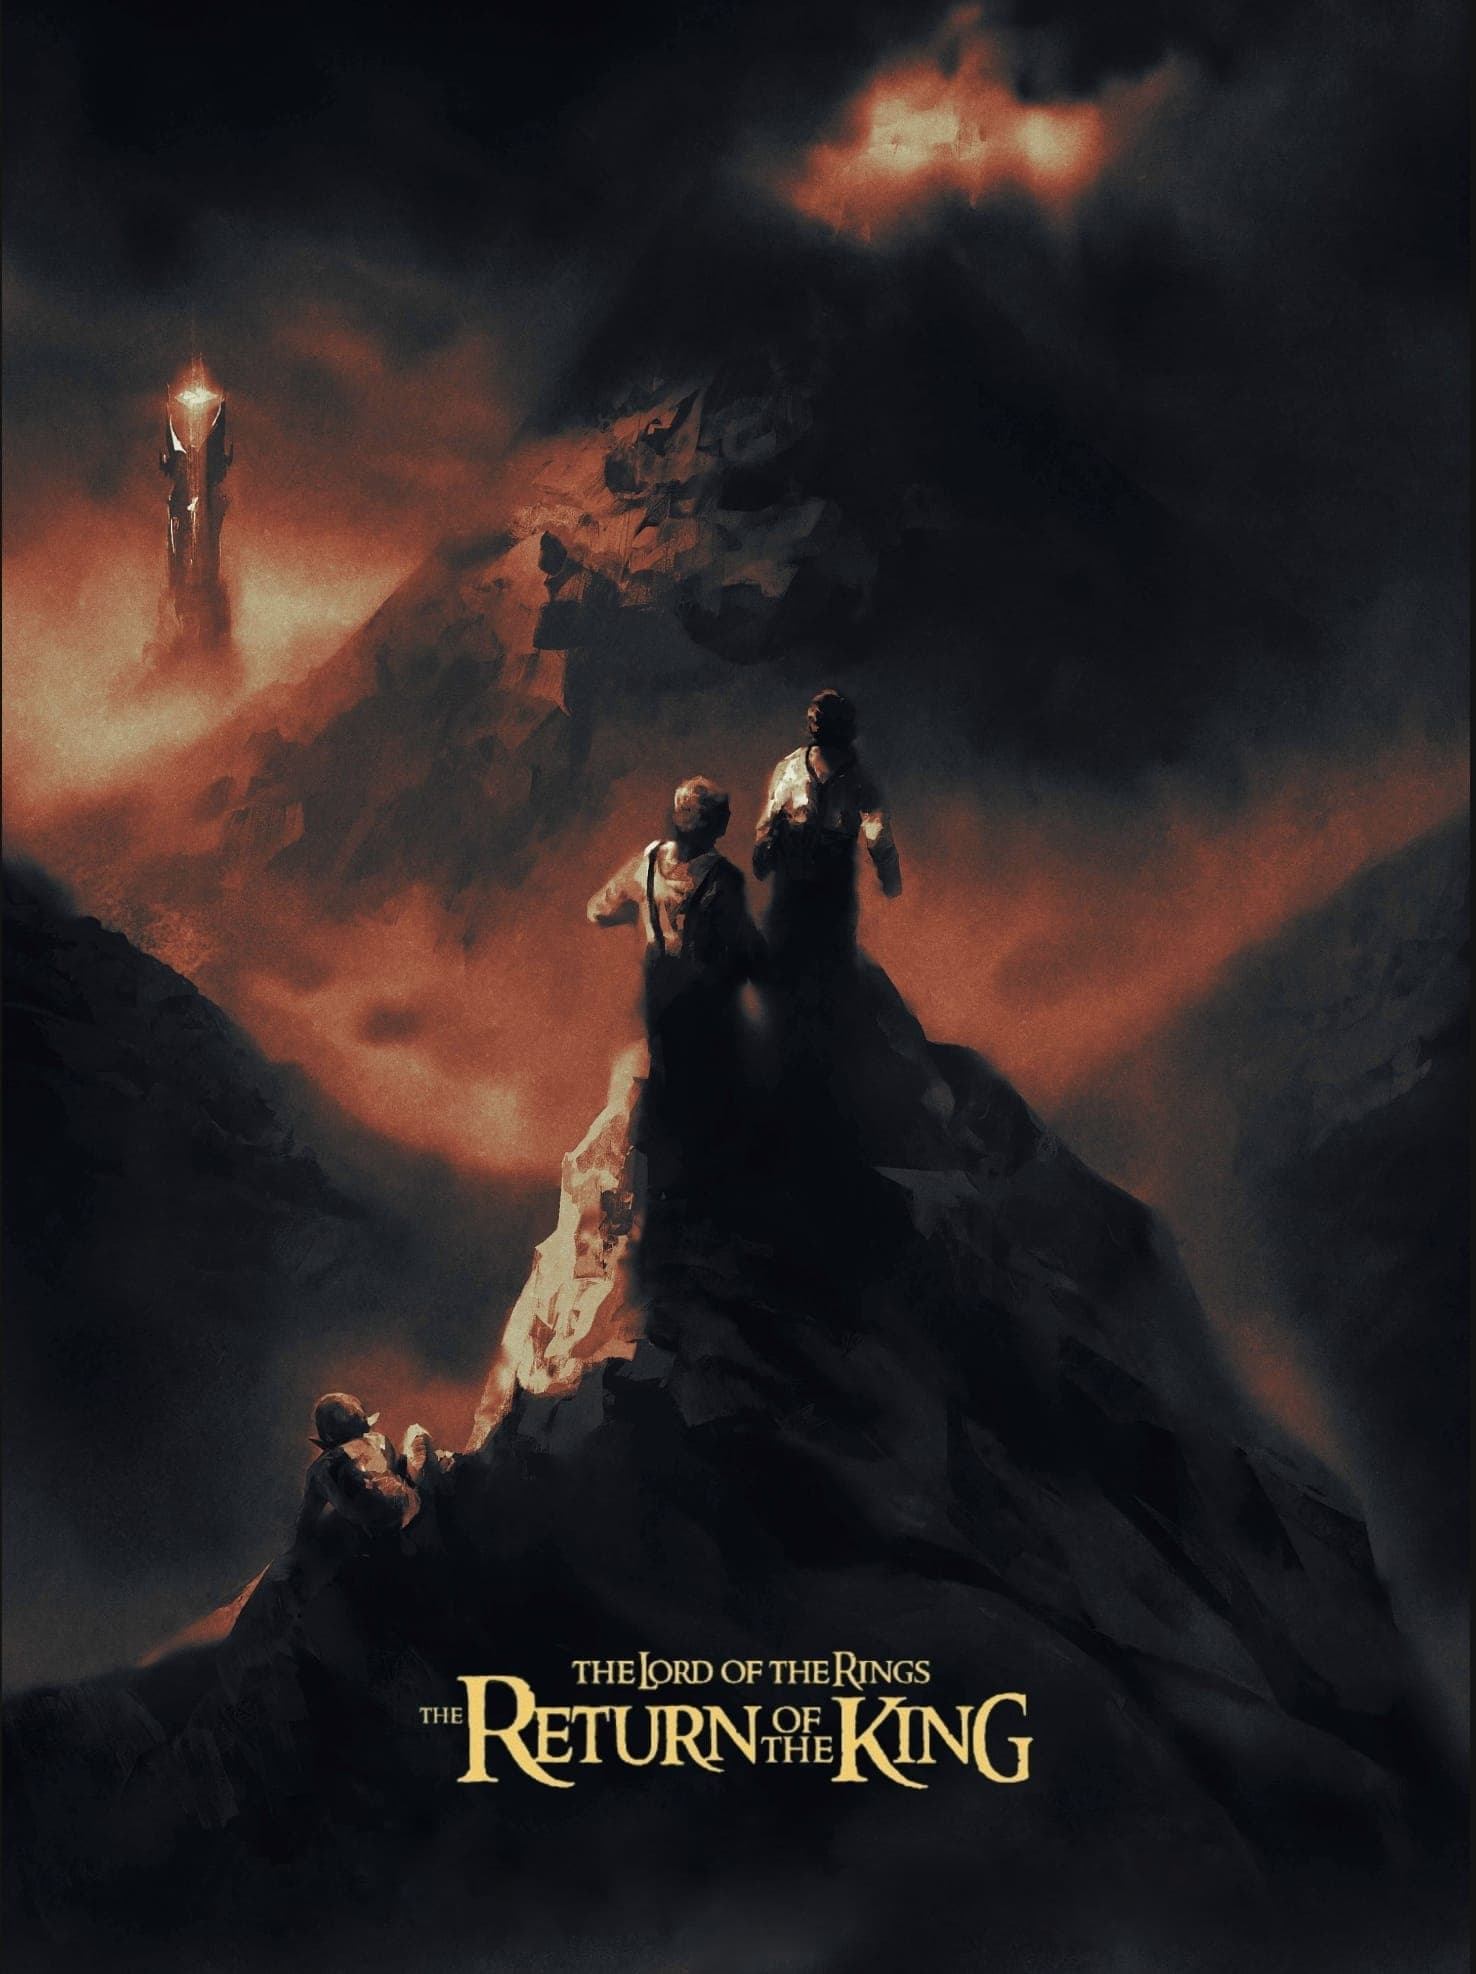 The Lord of the Rings: The Return of the King